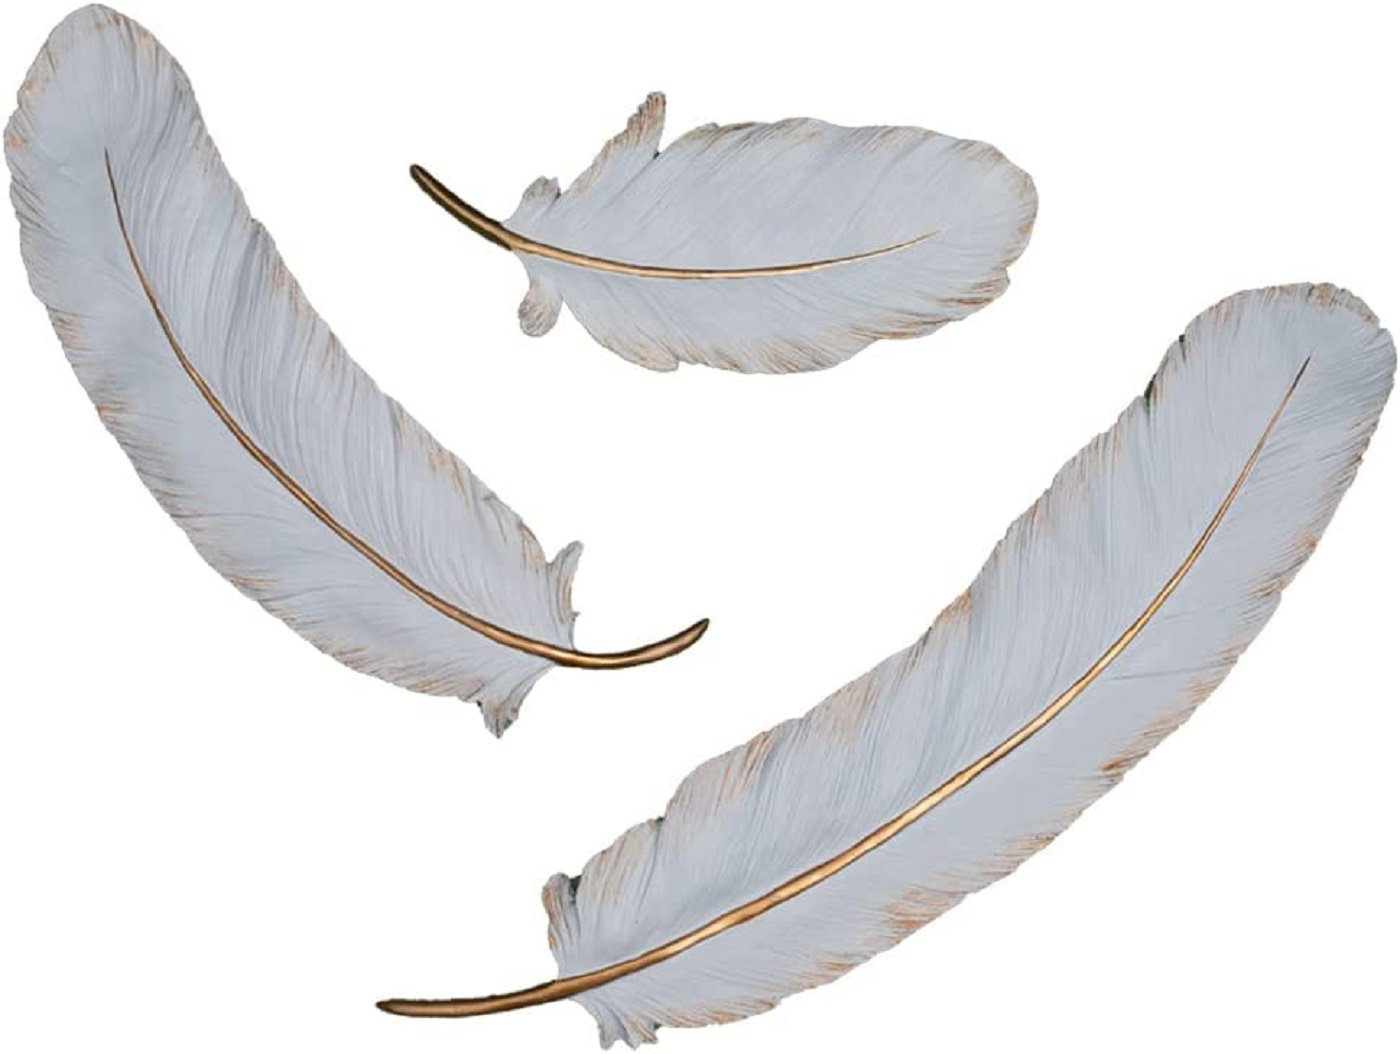 White Feathers, Feather Art, Feather Gifts, Feather Decor, Framed Feather,  Angel Wings Decor, Angel Feathers -  Israel